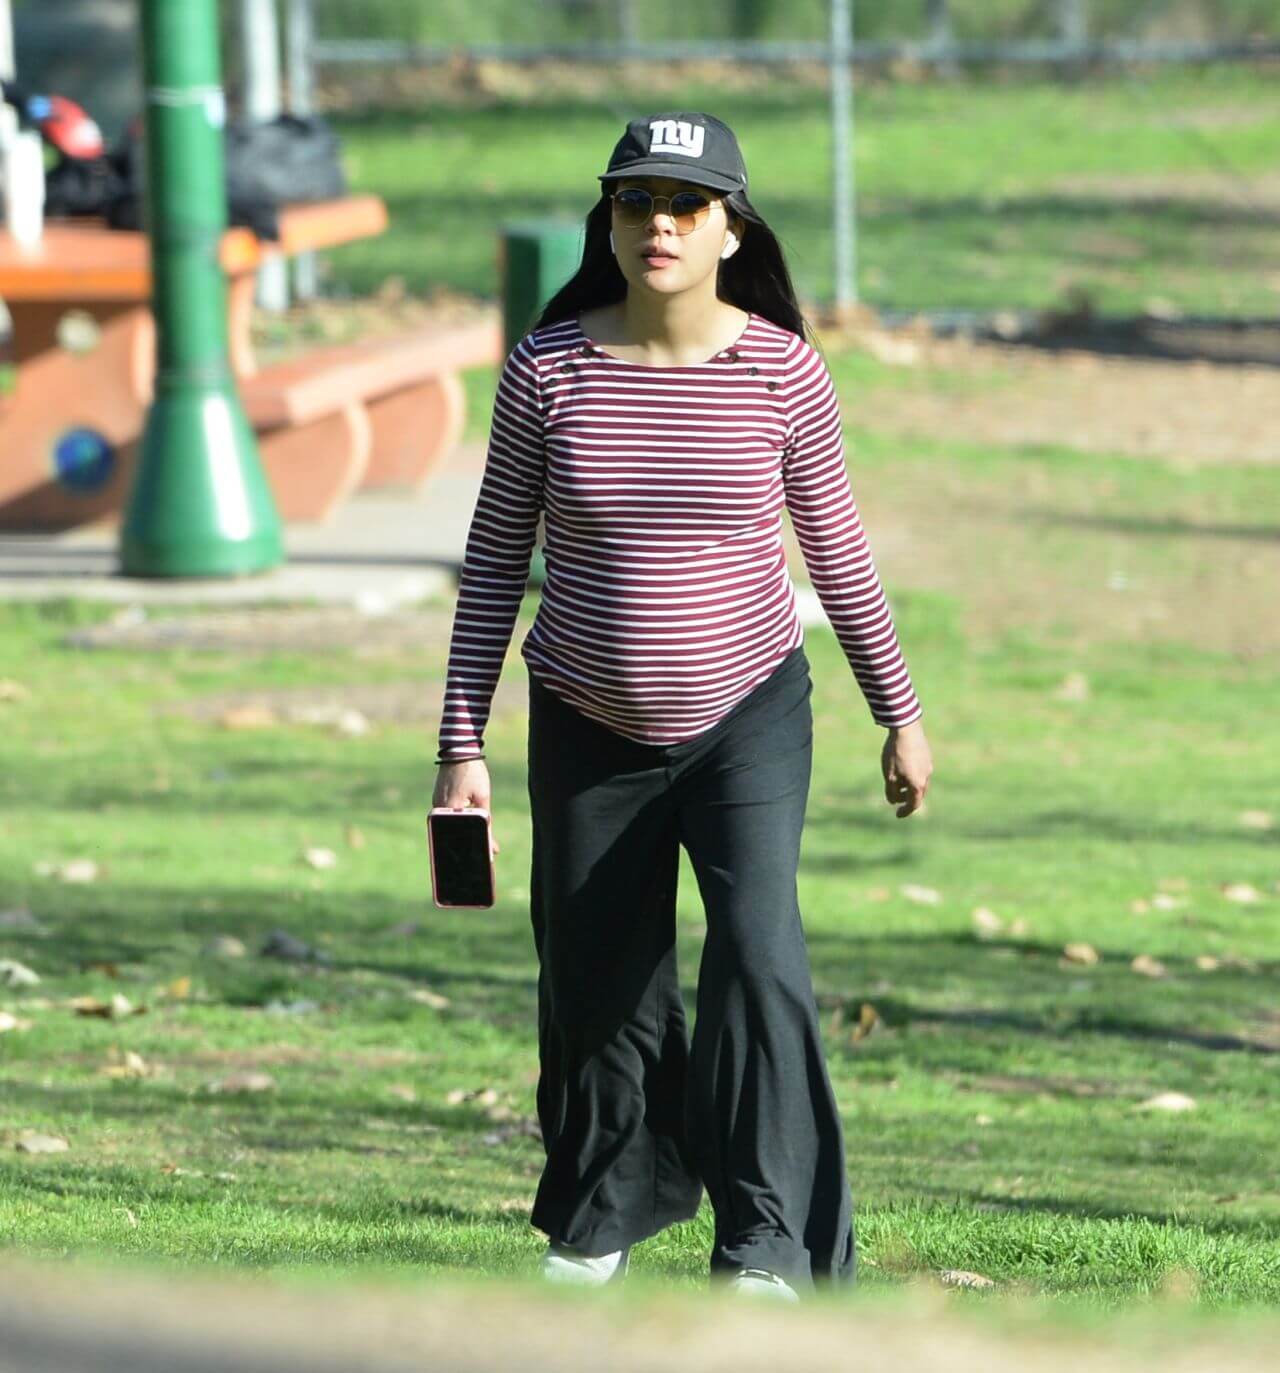 Constance Wu In Red Striped Full Sleeves Top With Black Flare Pants At Park in Los Angeles